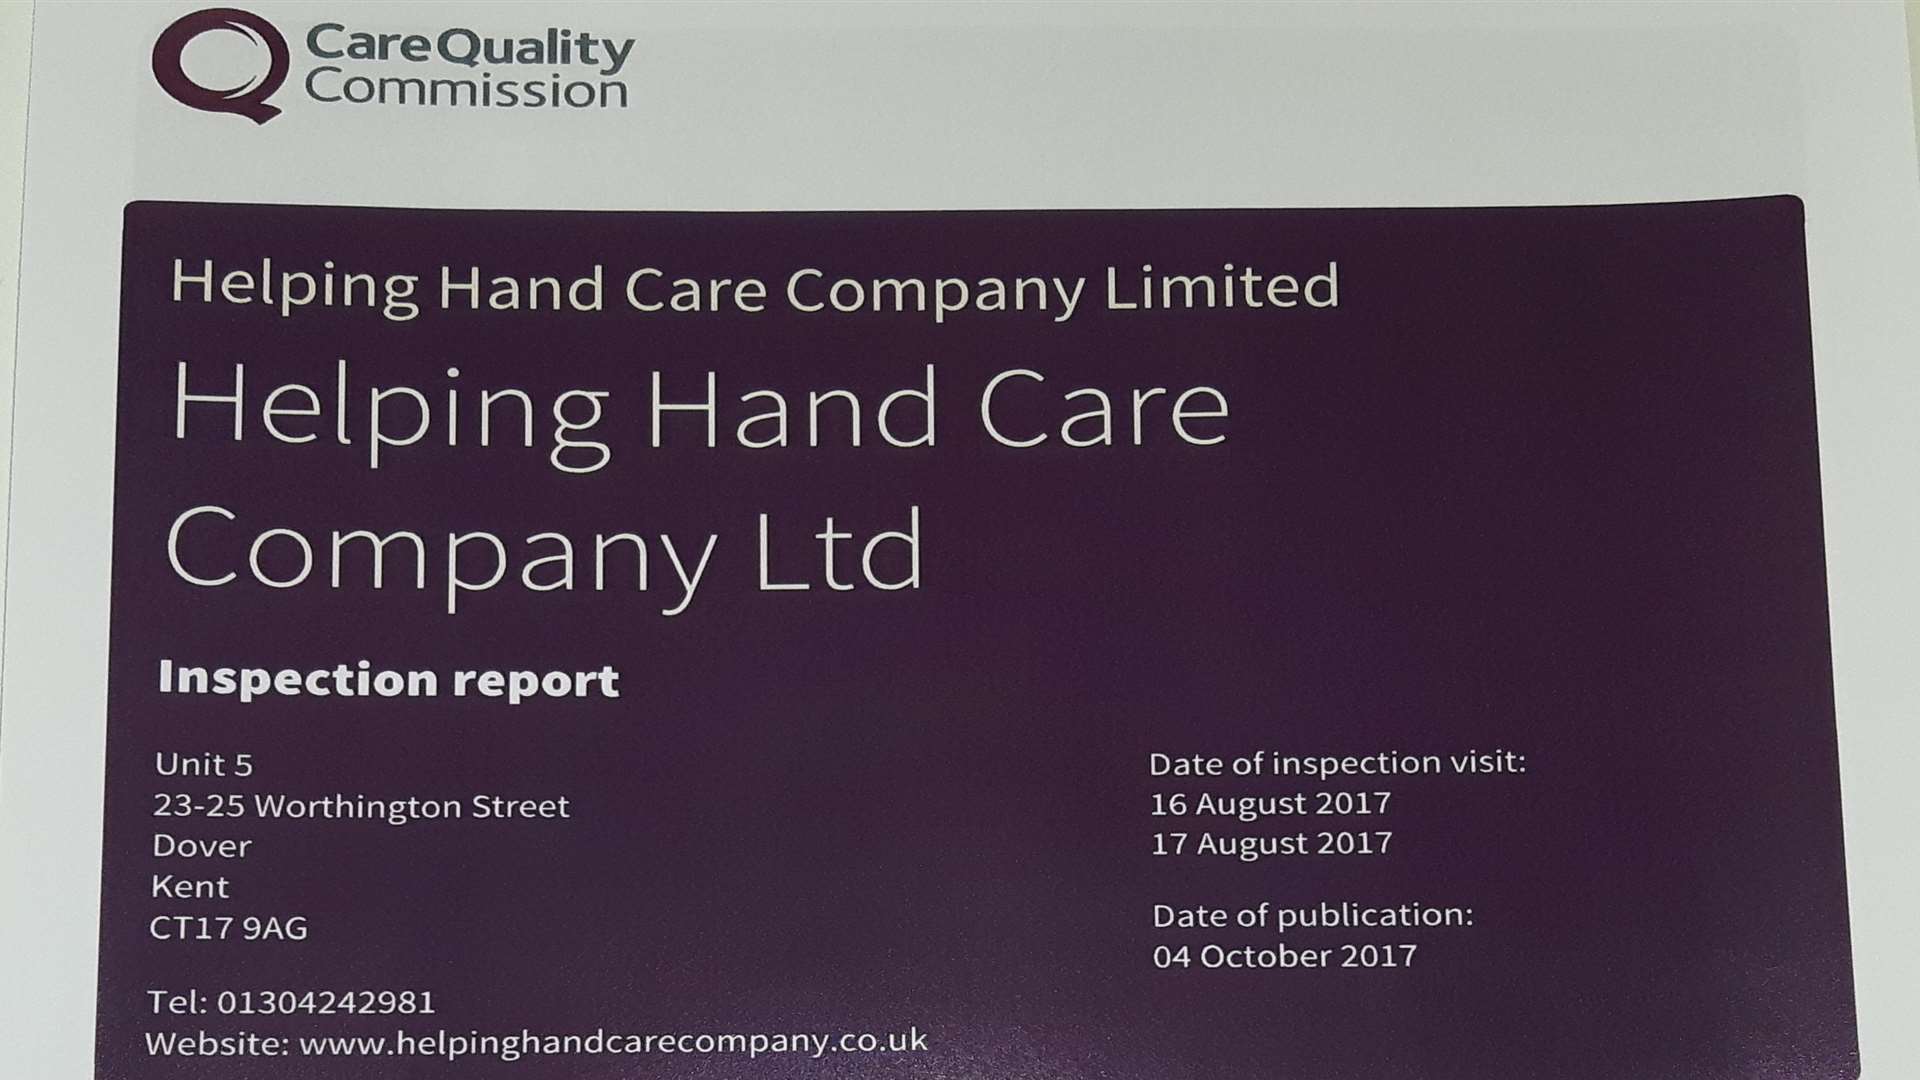 CQC report on the Helping Hand Care Company